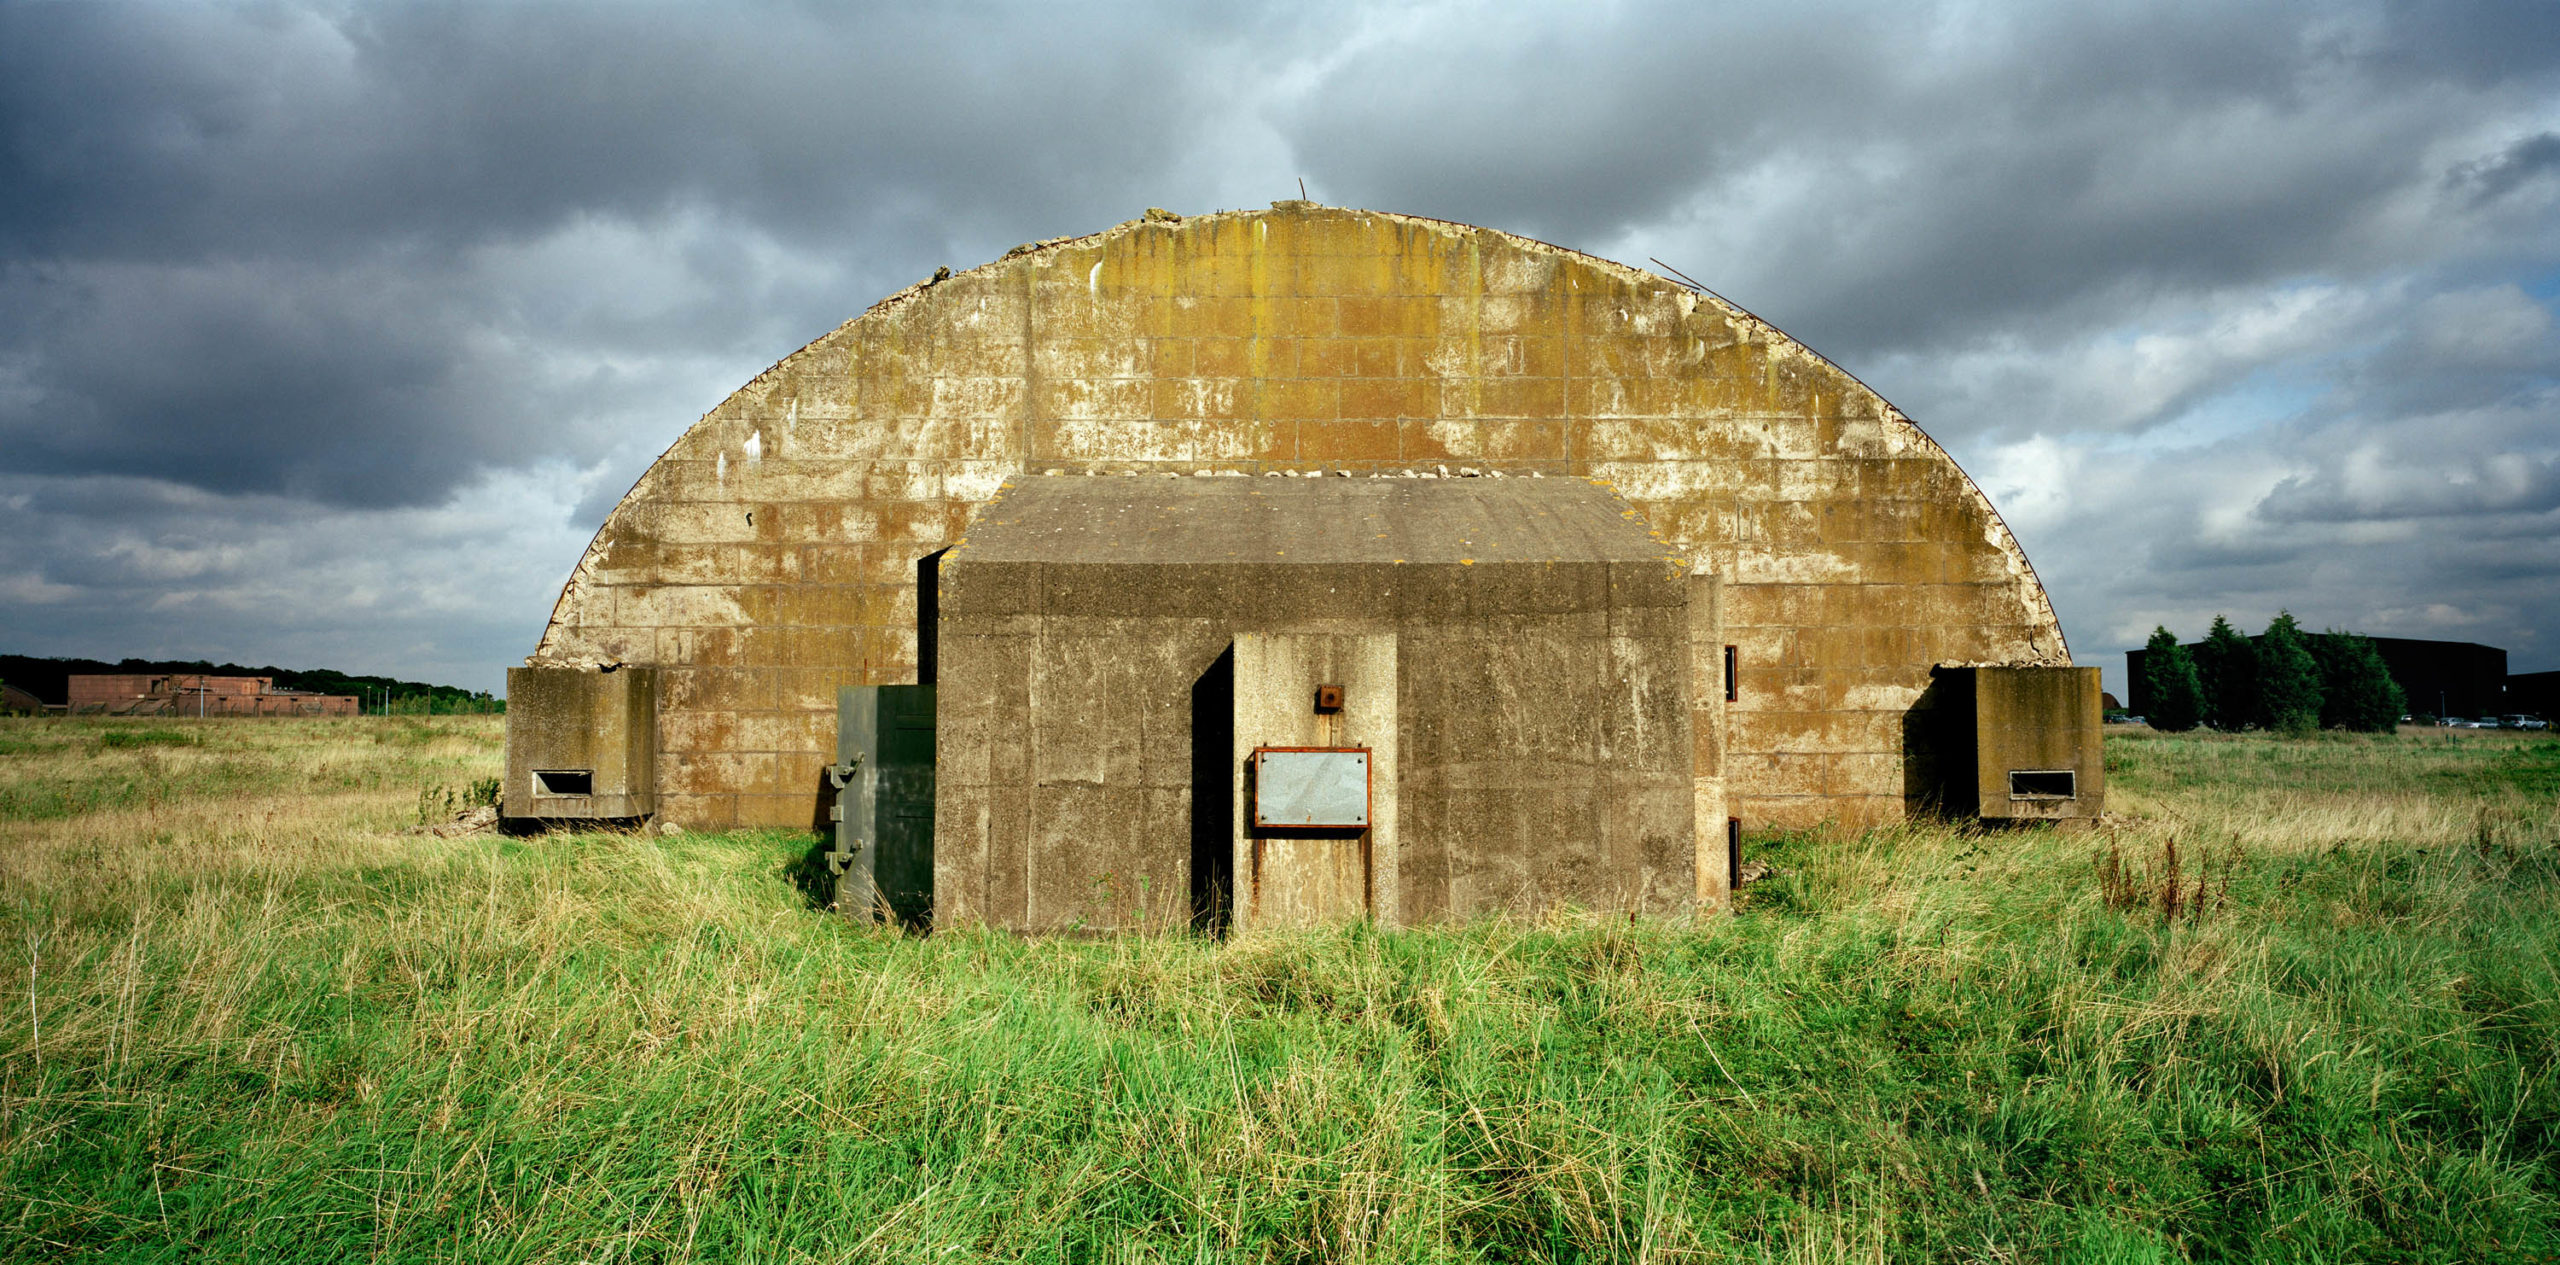 United Kingdom. Airplane shelter at a US Air Force base